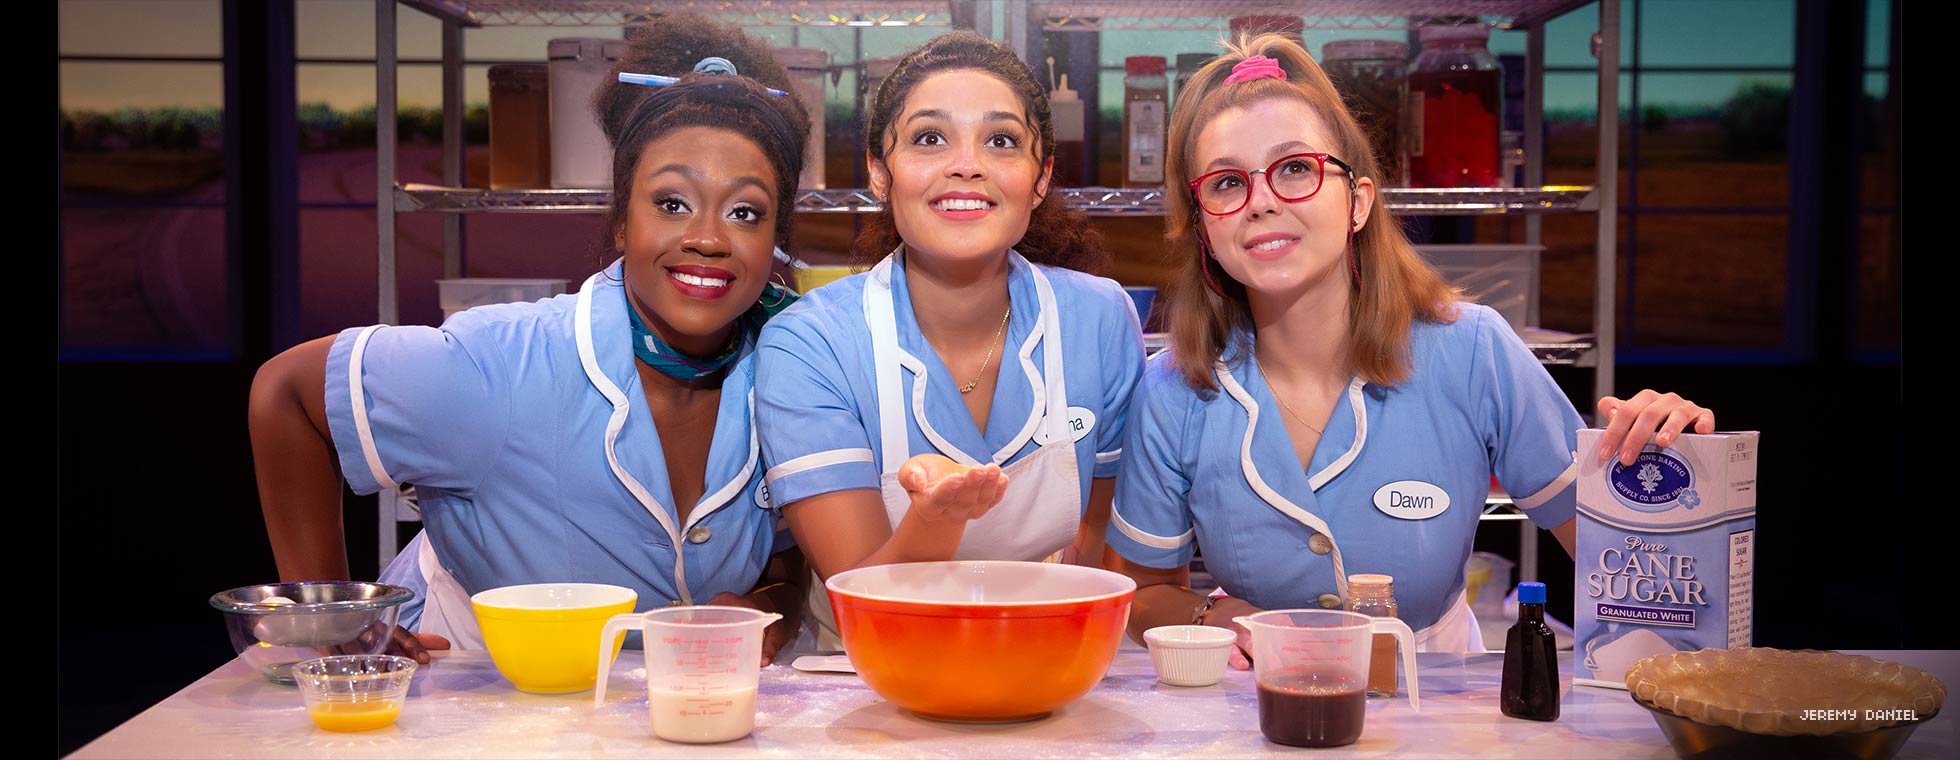 Three diverse women stand at a counter surrounded by pie-baking ingredients.